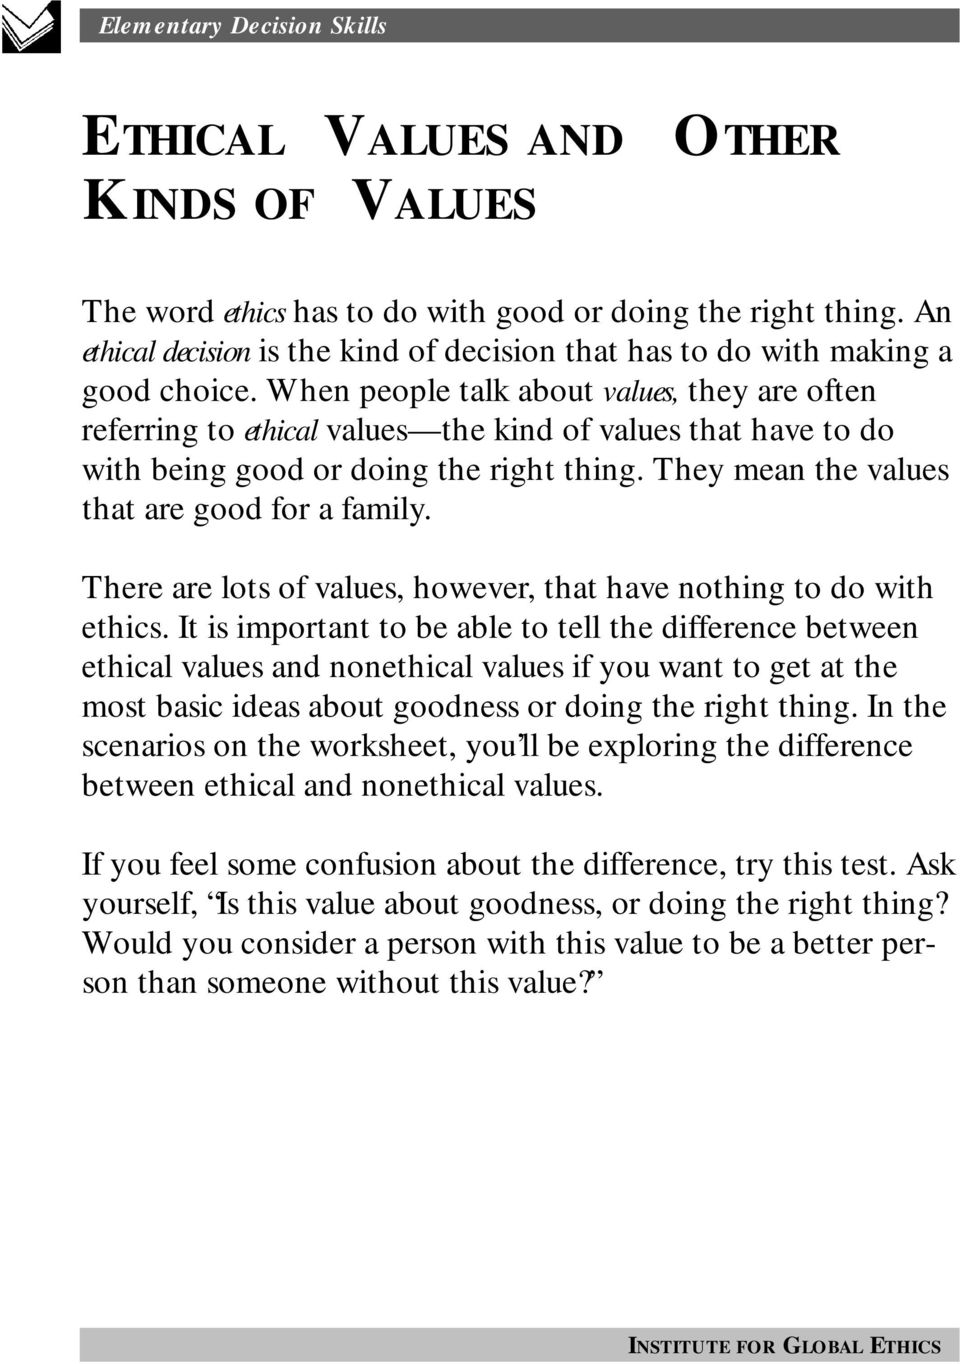 There are lots of values, however, that have nothing to do with ethics.